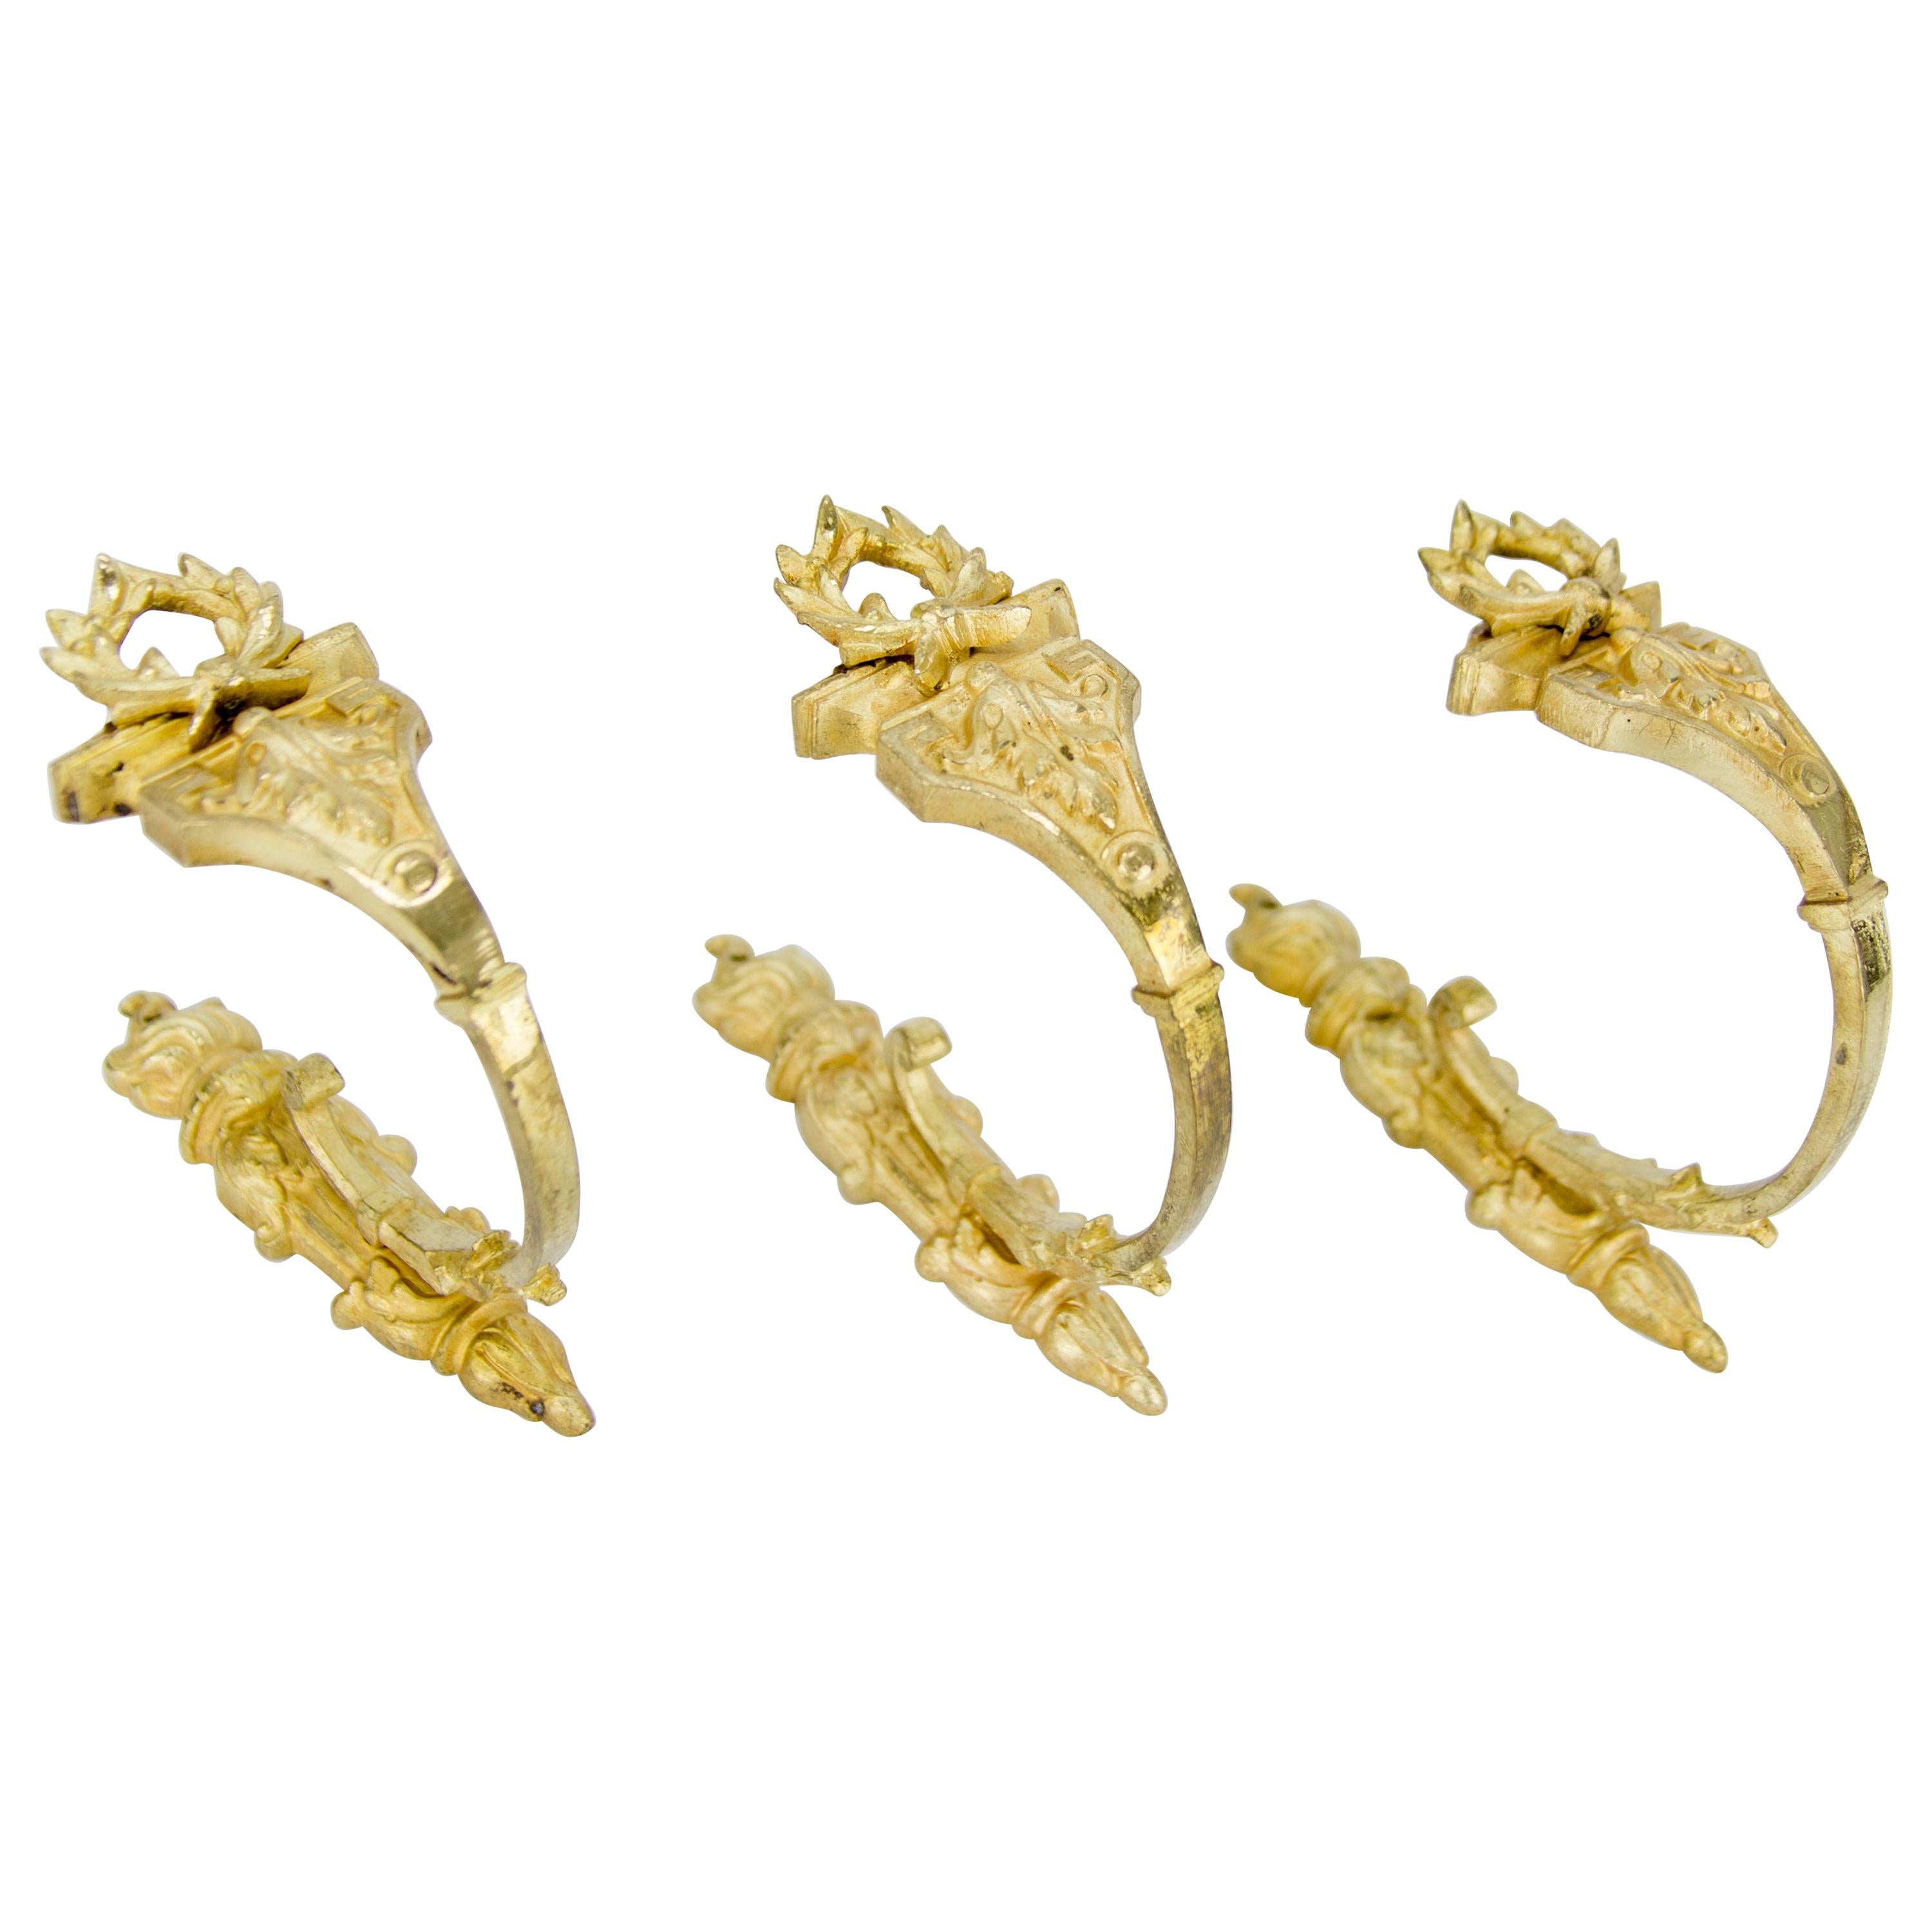 French Gilt Bronze Curtain Tiebacks or Curtain Holders Signed A.D., Set of 3